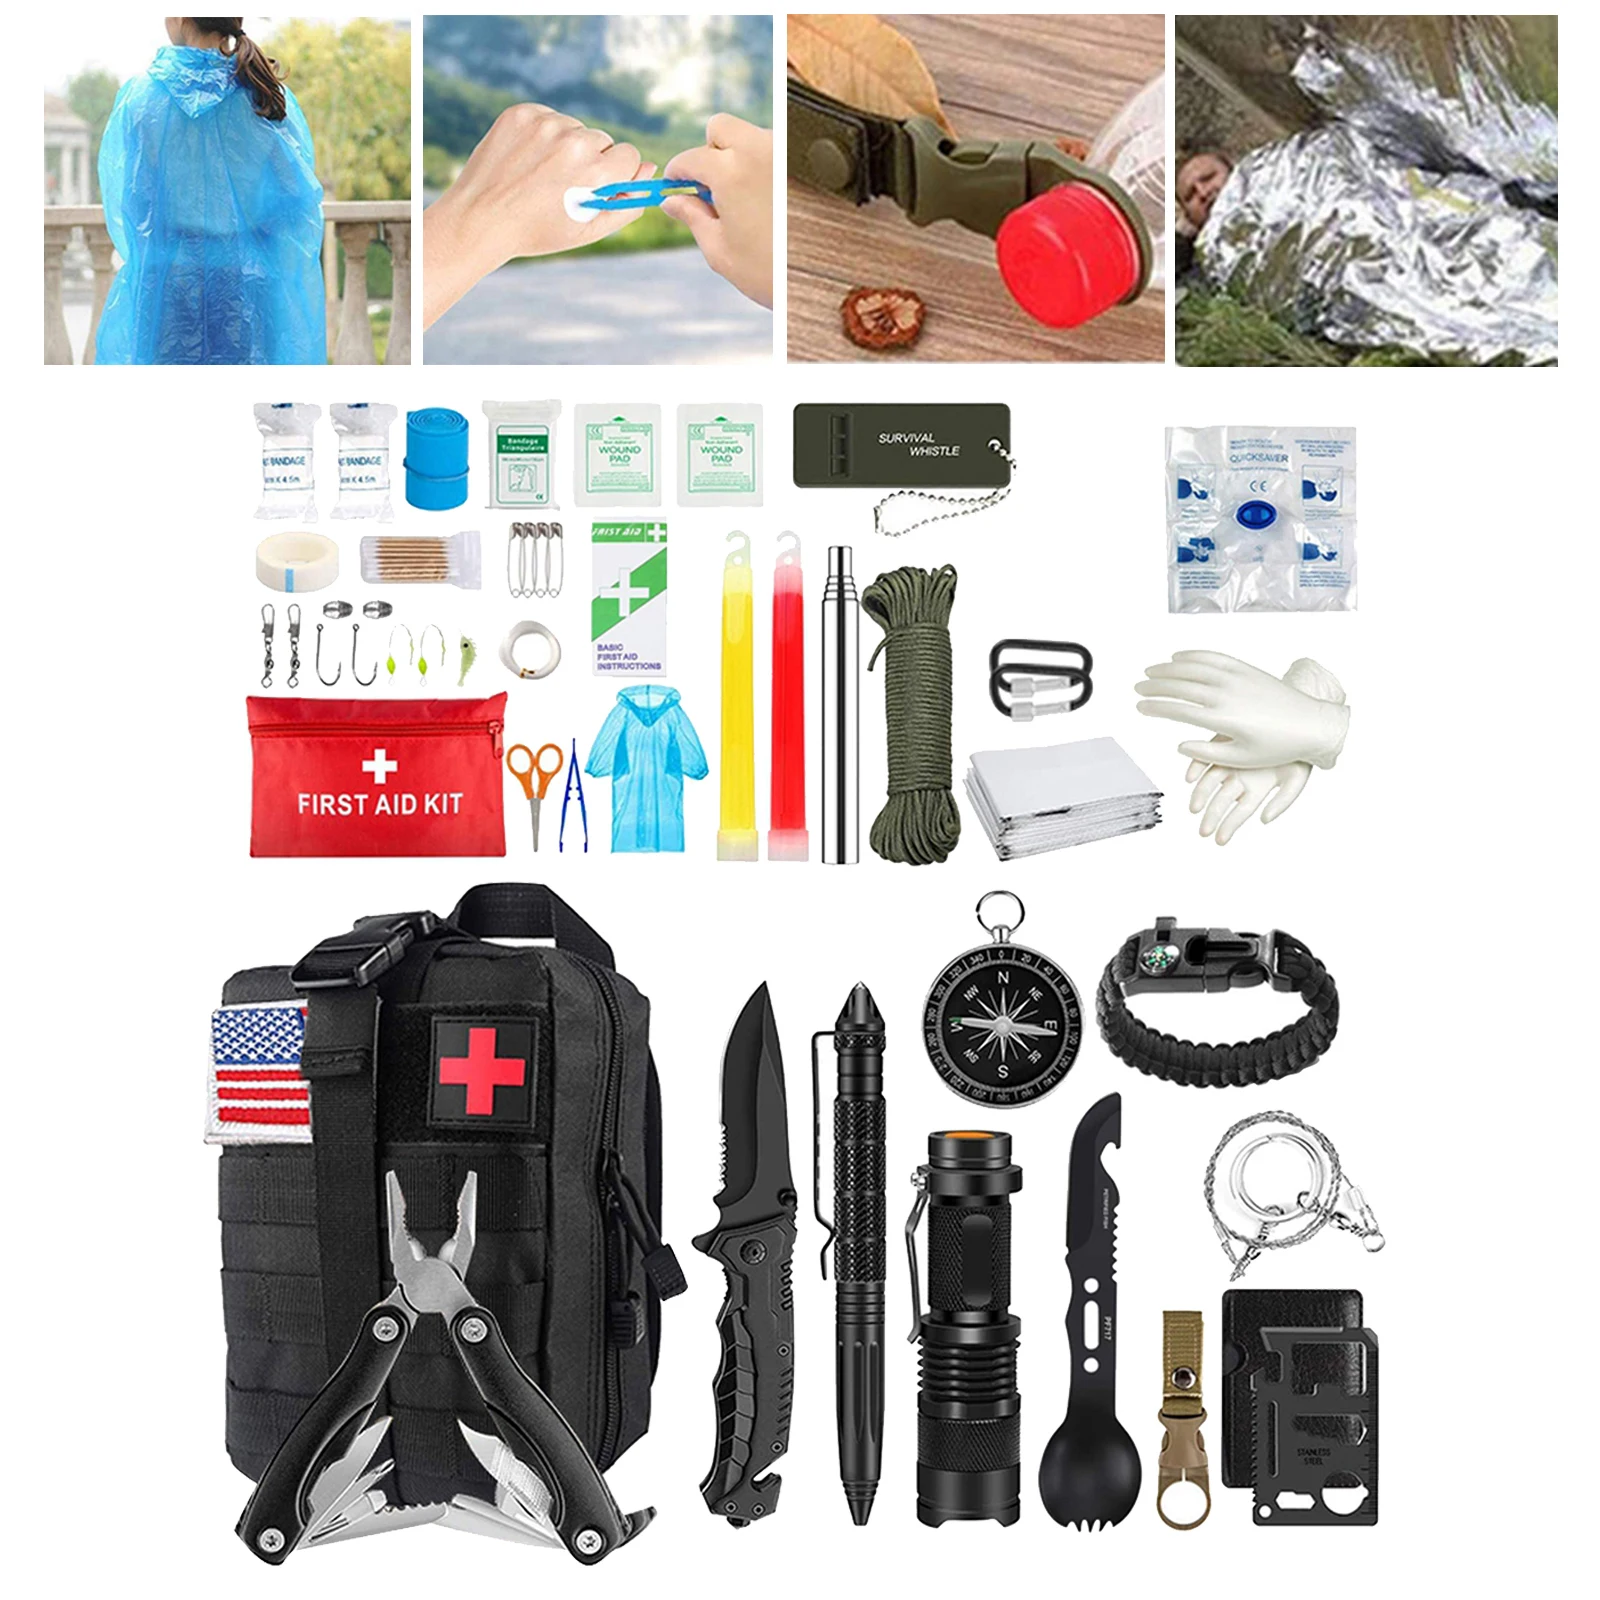 33 In 1 Emergency Survival Gear Kit   SOS  Birthday Gift Father